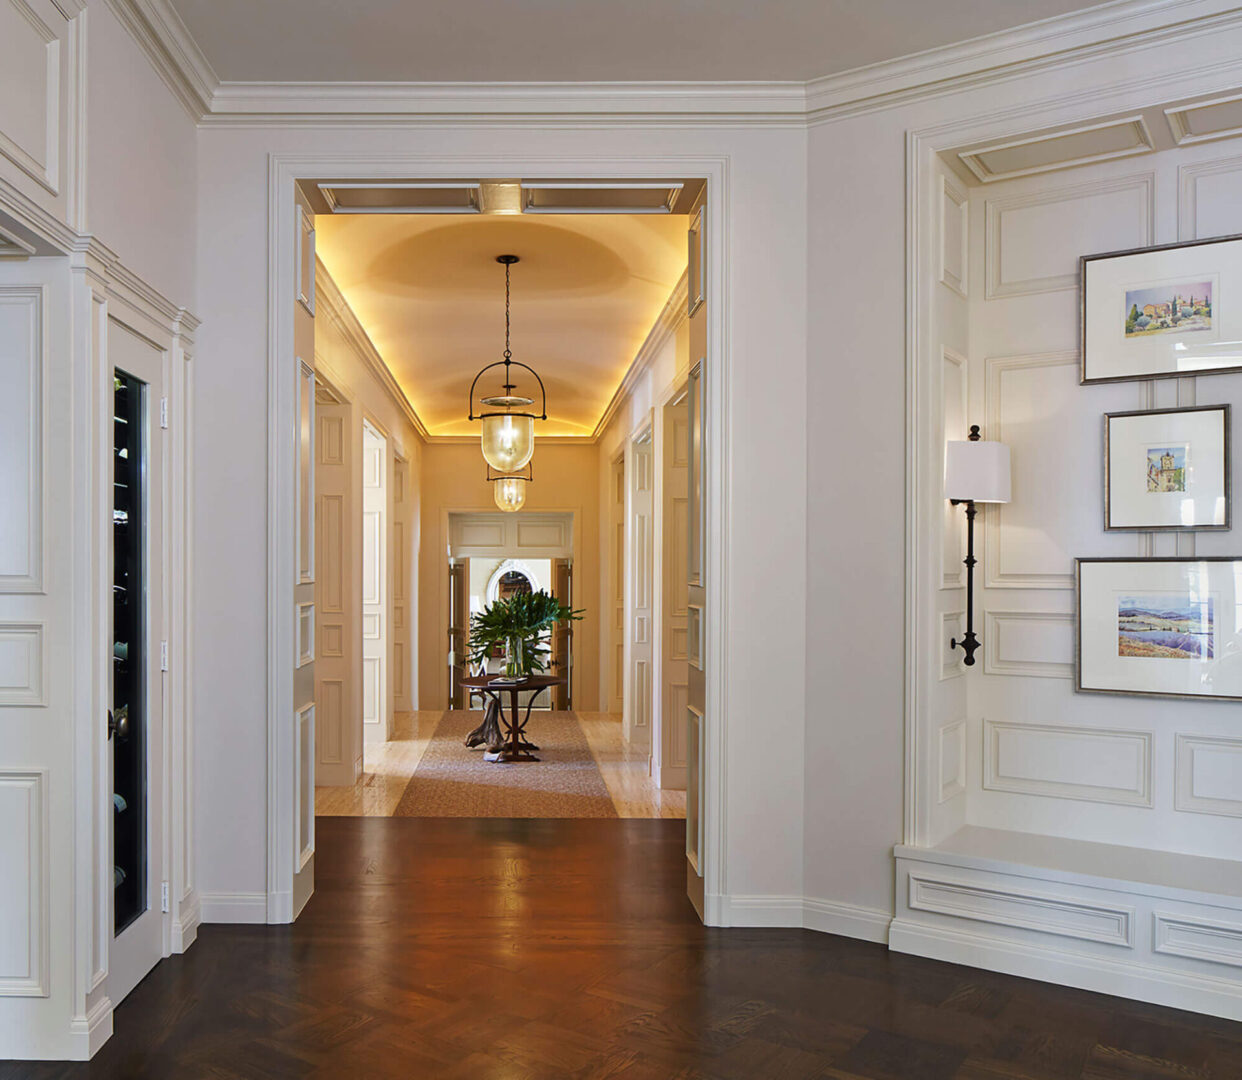 A hallway with white walls and wooden floors.